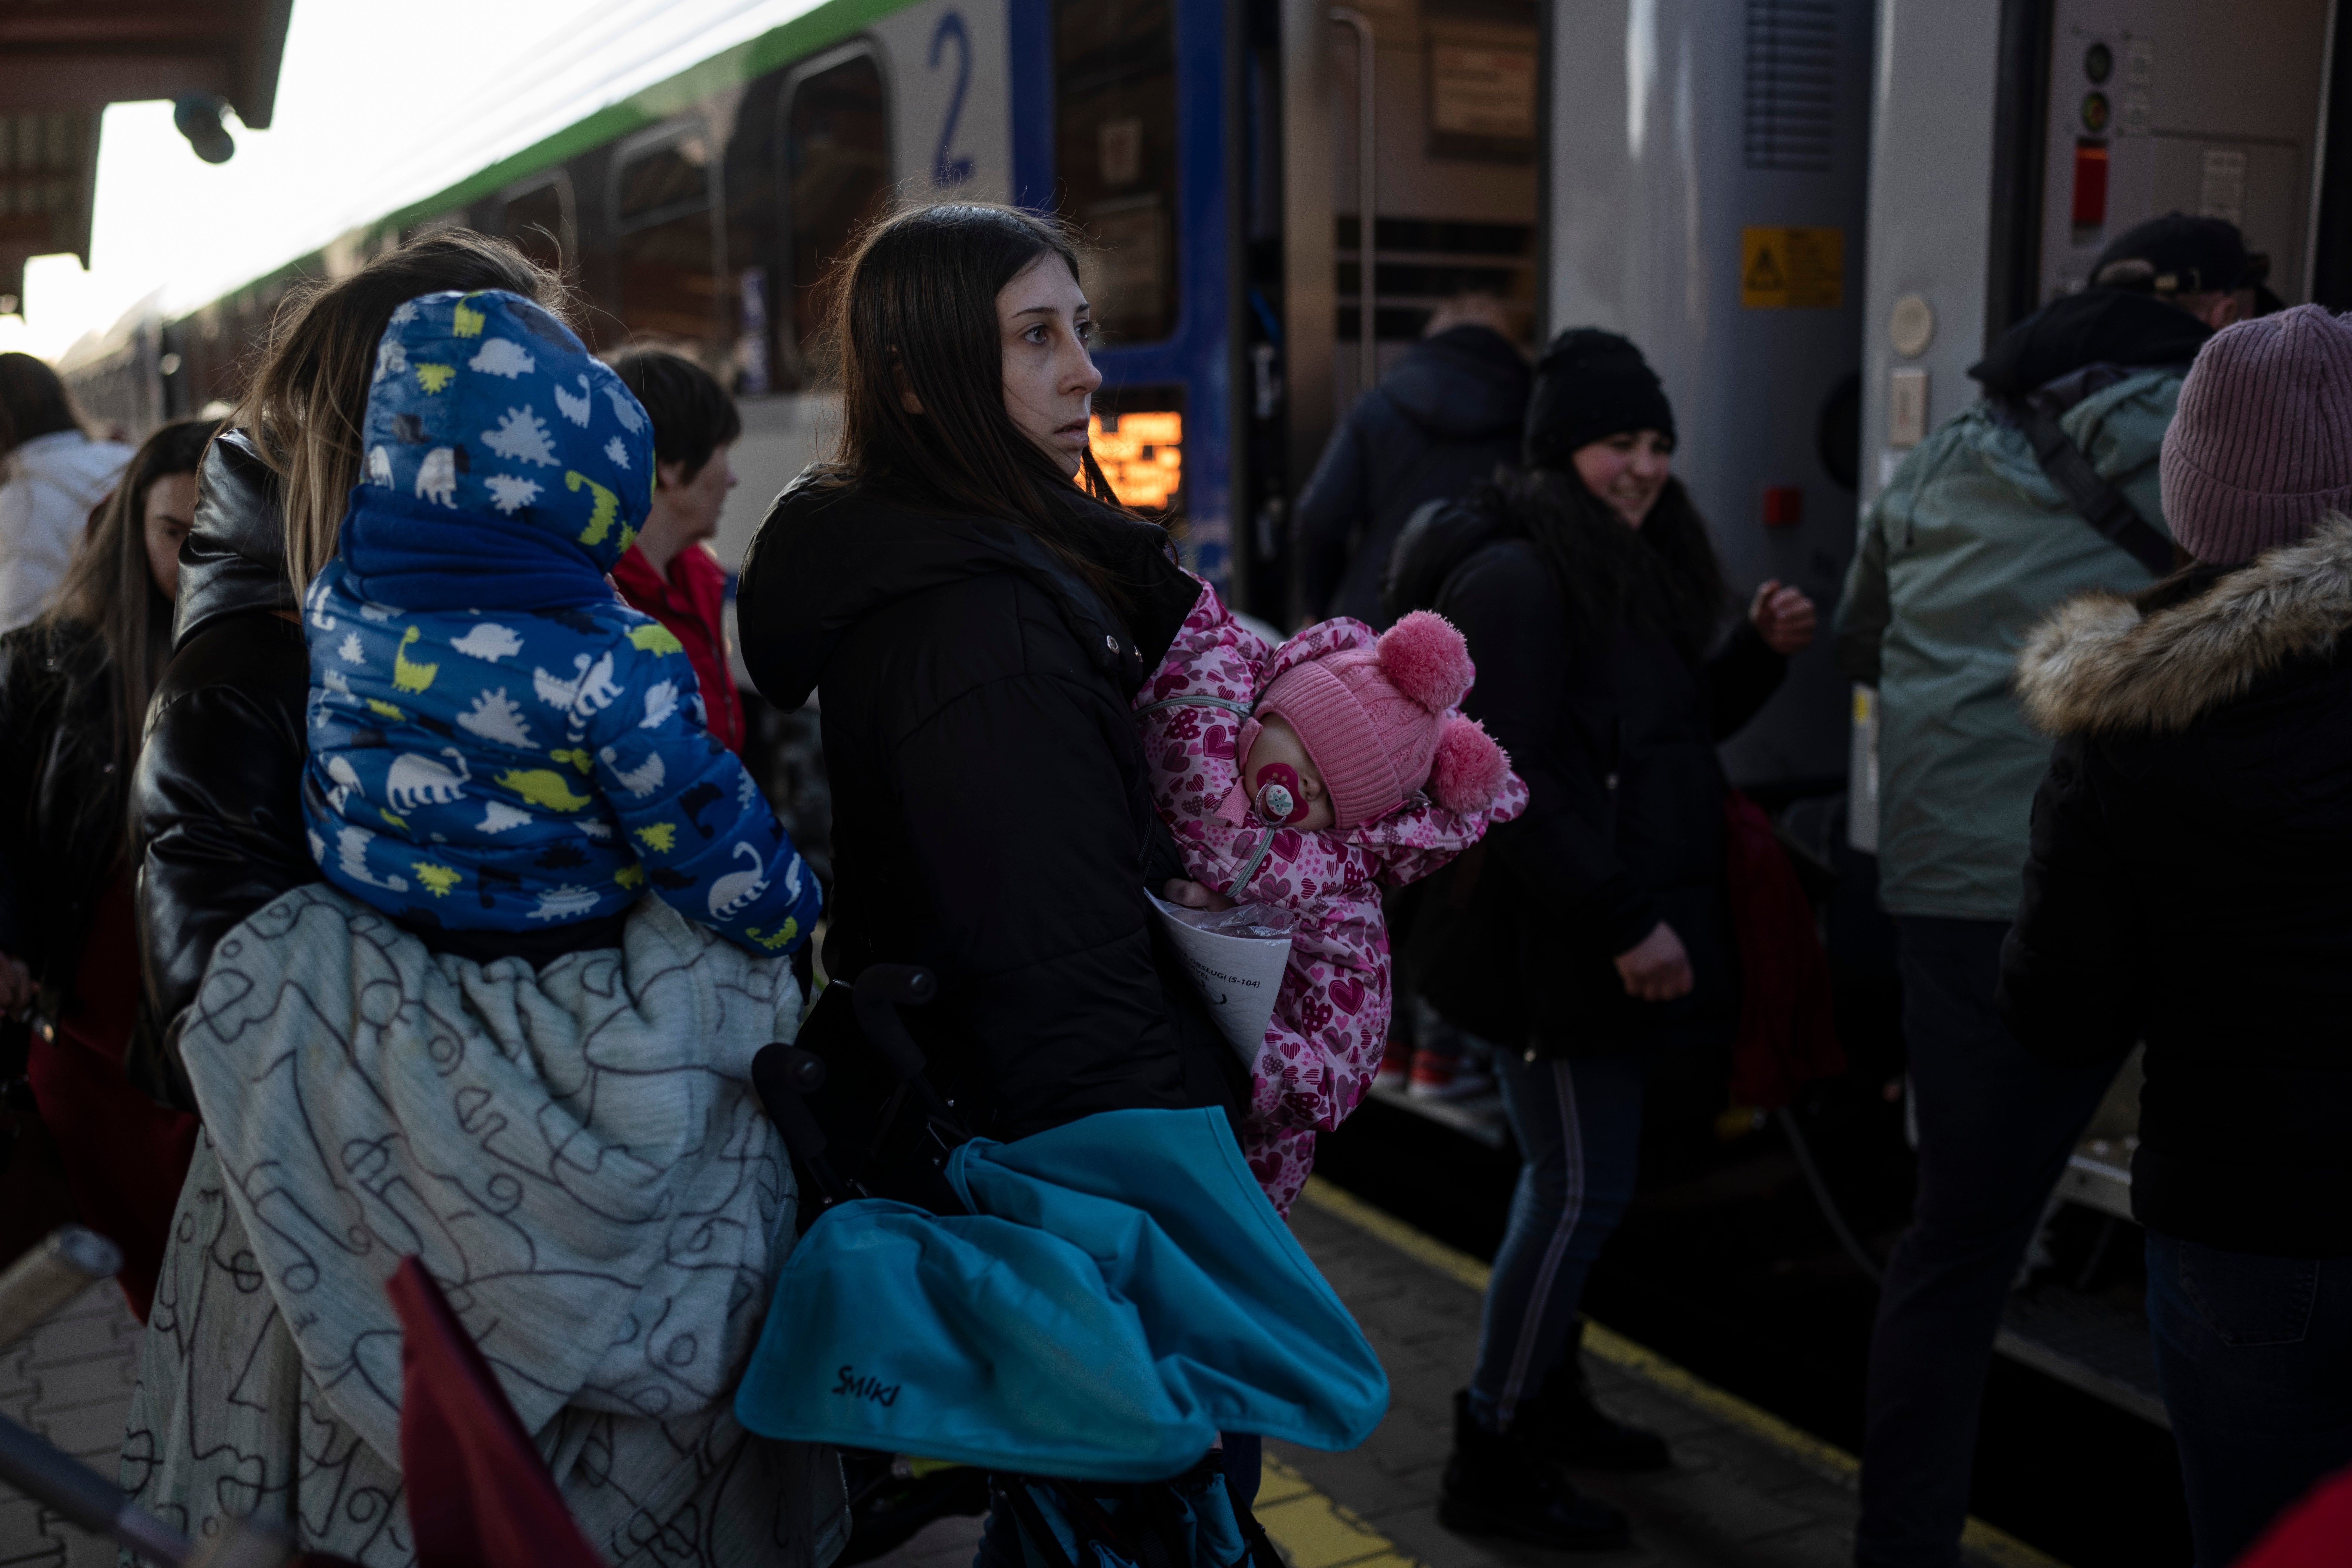 People who fled the war in Ukraine wait at the train station in Przemysl, southeastern Poland, 17 March 2022